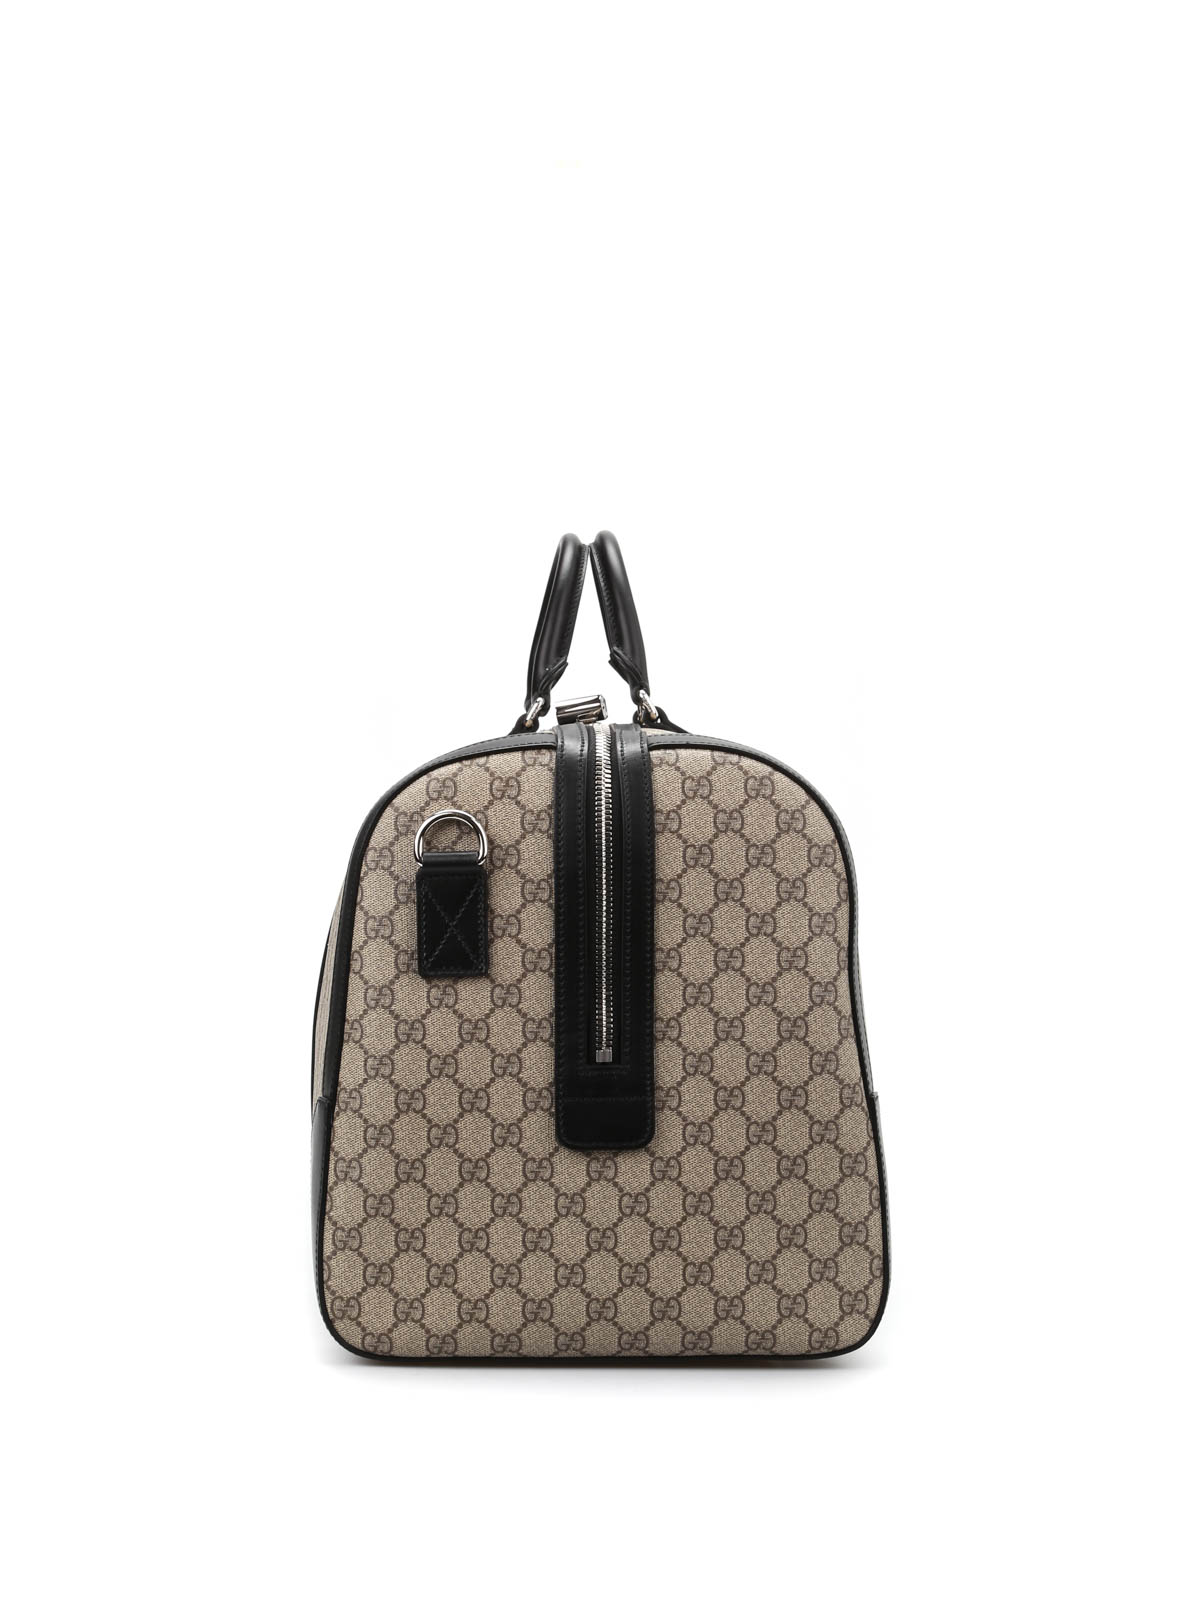 Gucci Black GG Supreme Canvas and Leather Medium Carry On Duffle